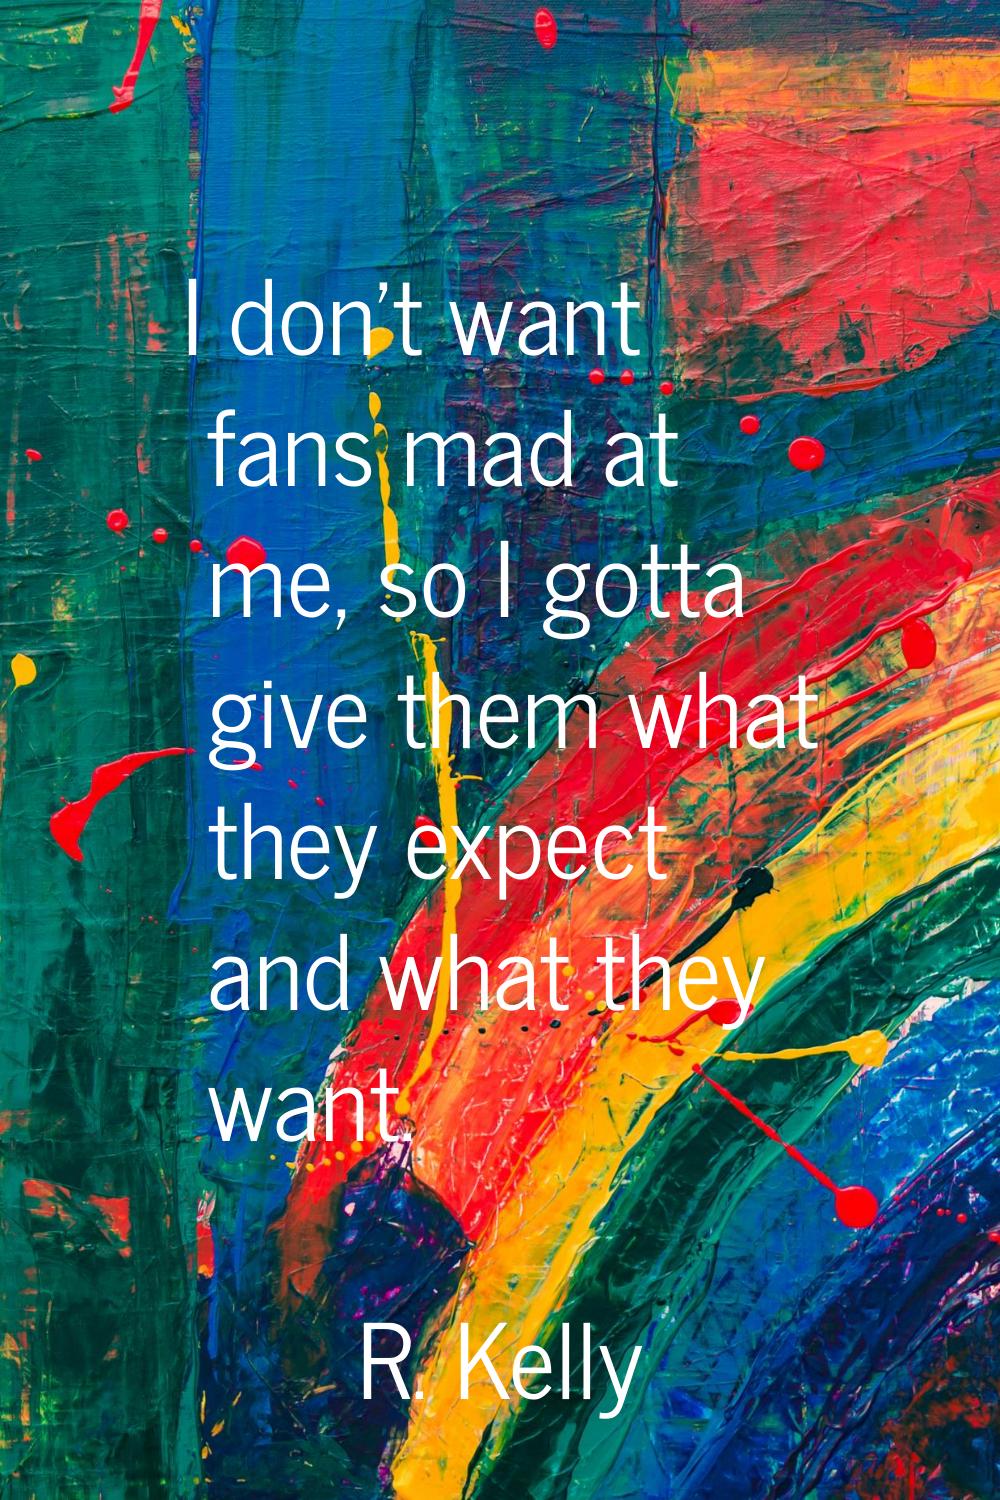 I don't want fans mad at me, so I gotta give them what they expect and what they want.